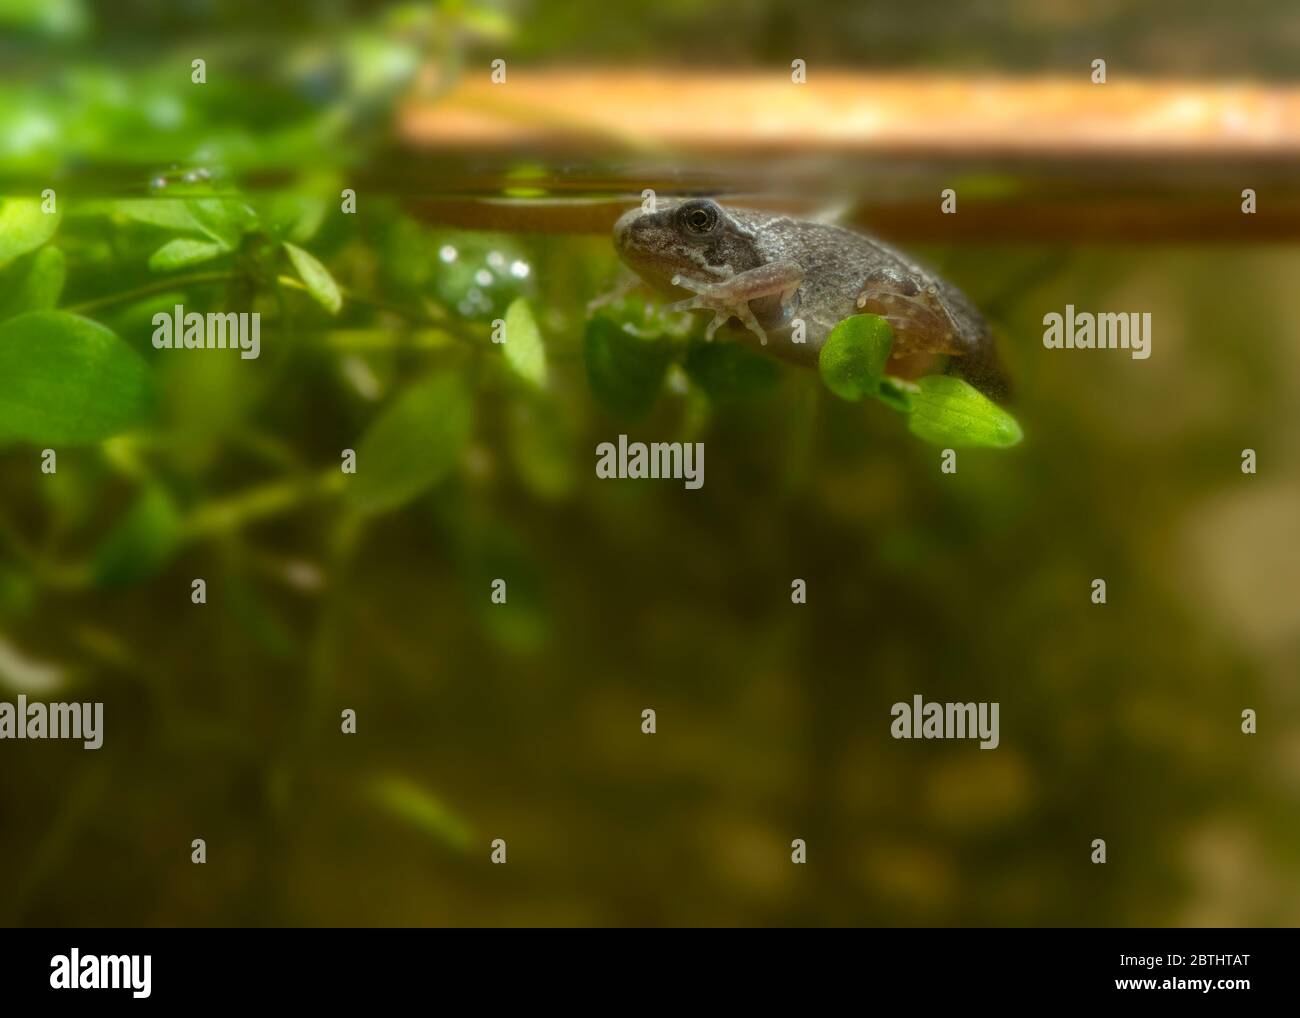 Small tadpole of frog swimming near green leaves in clean water inside glass tank transitioning Stock Photo